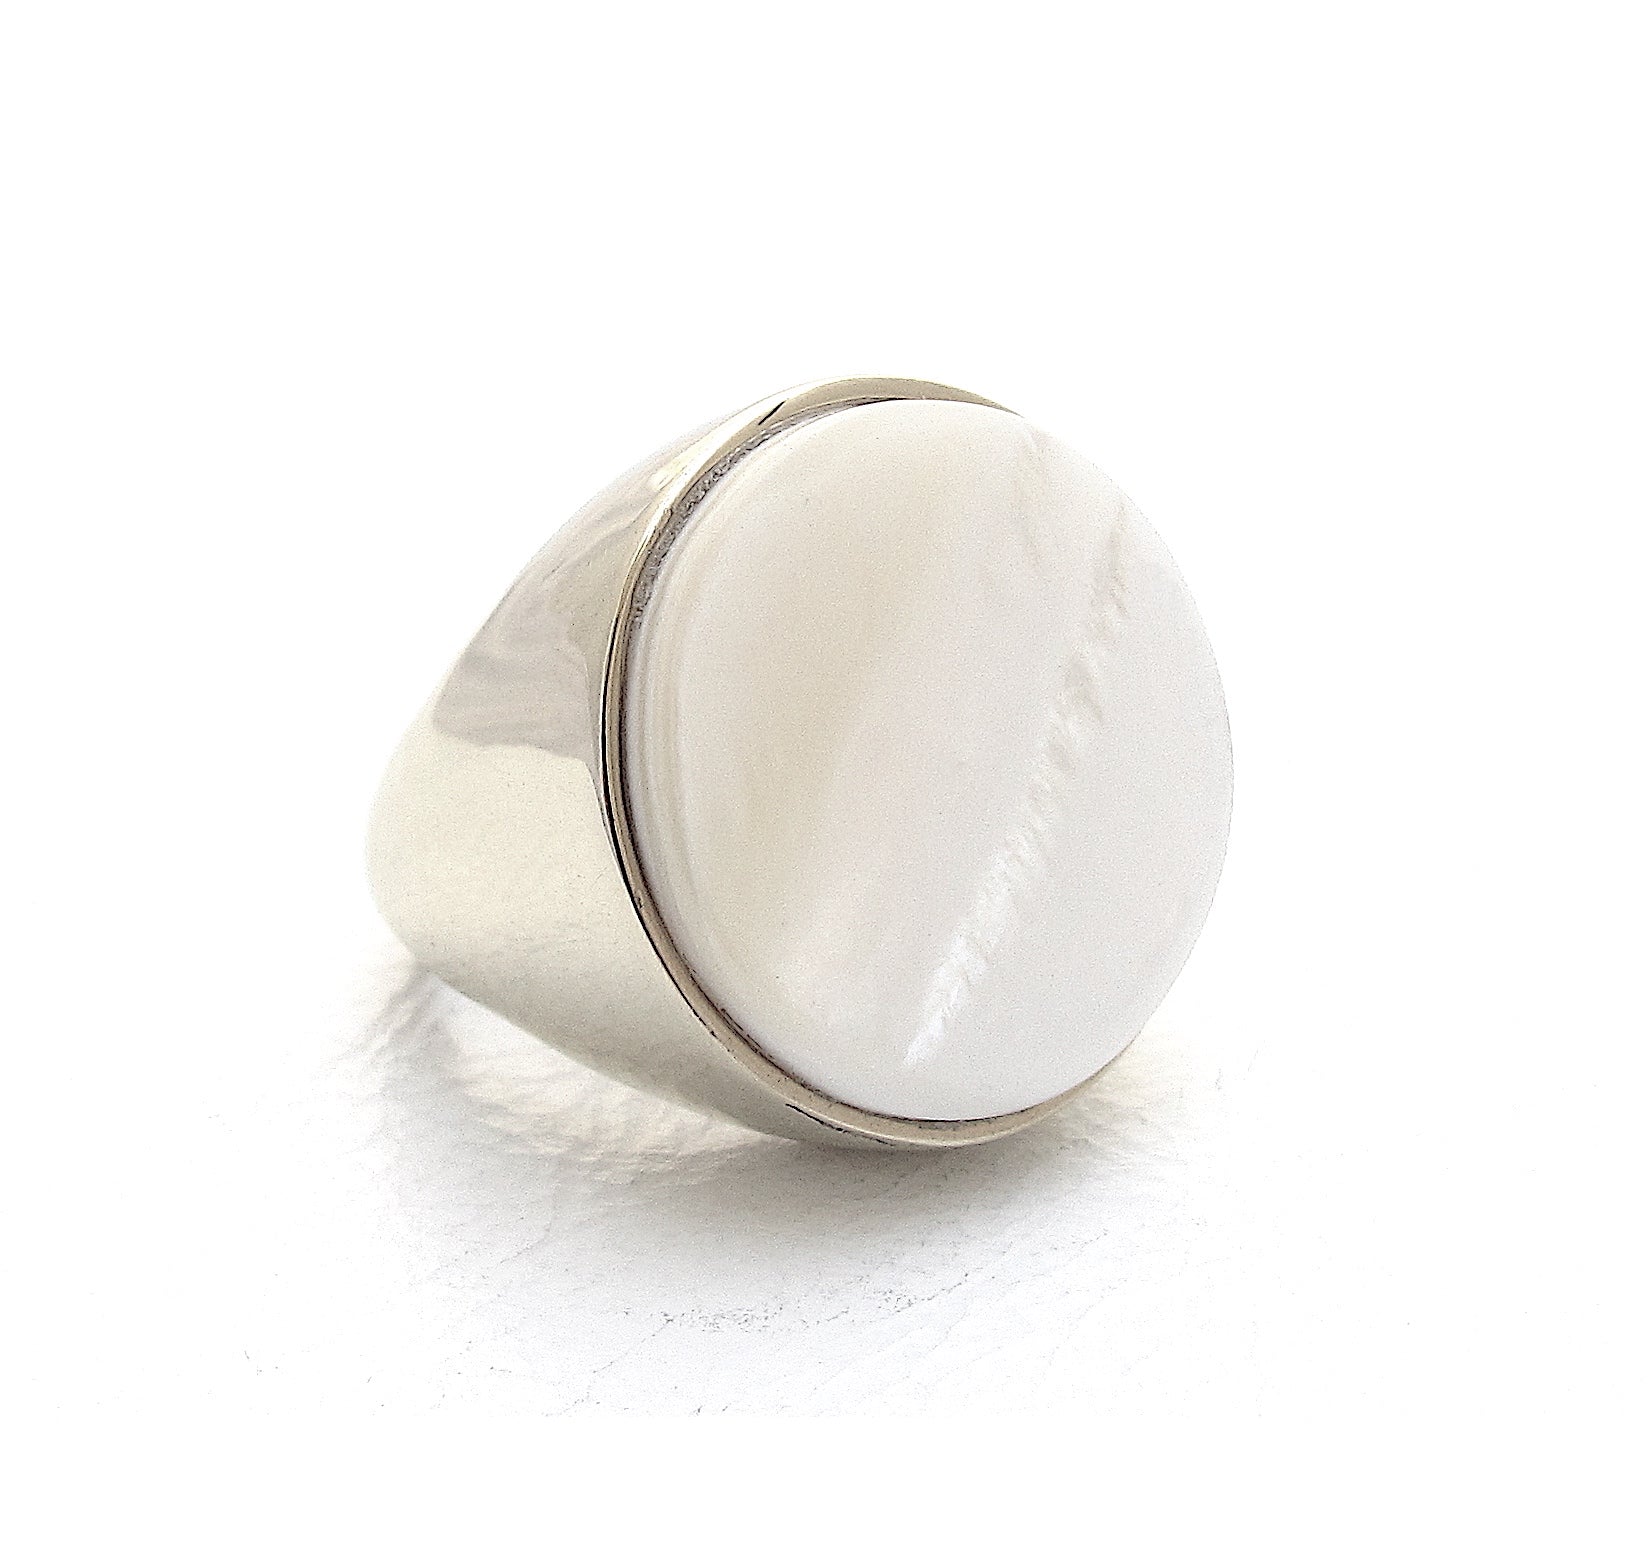 Balloon Mother of Pearl ring